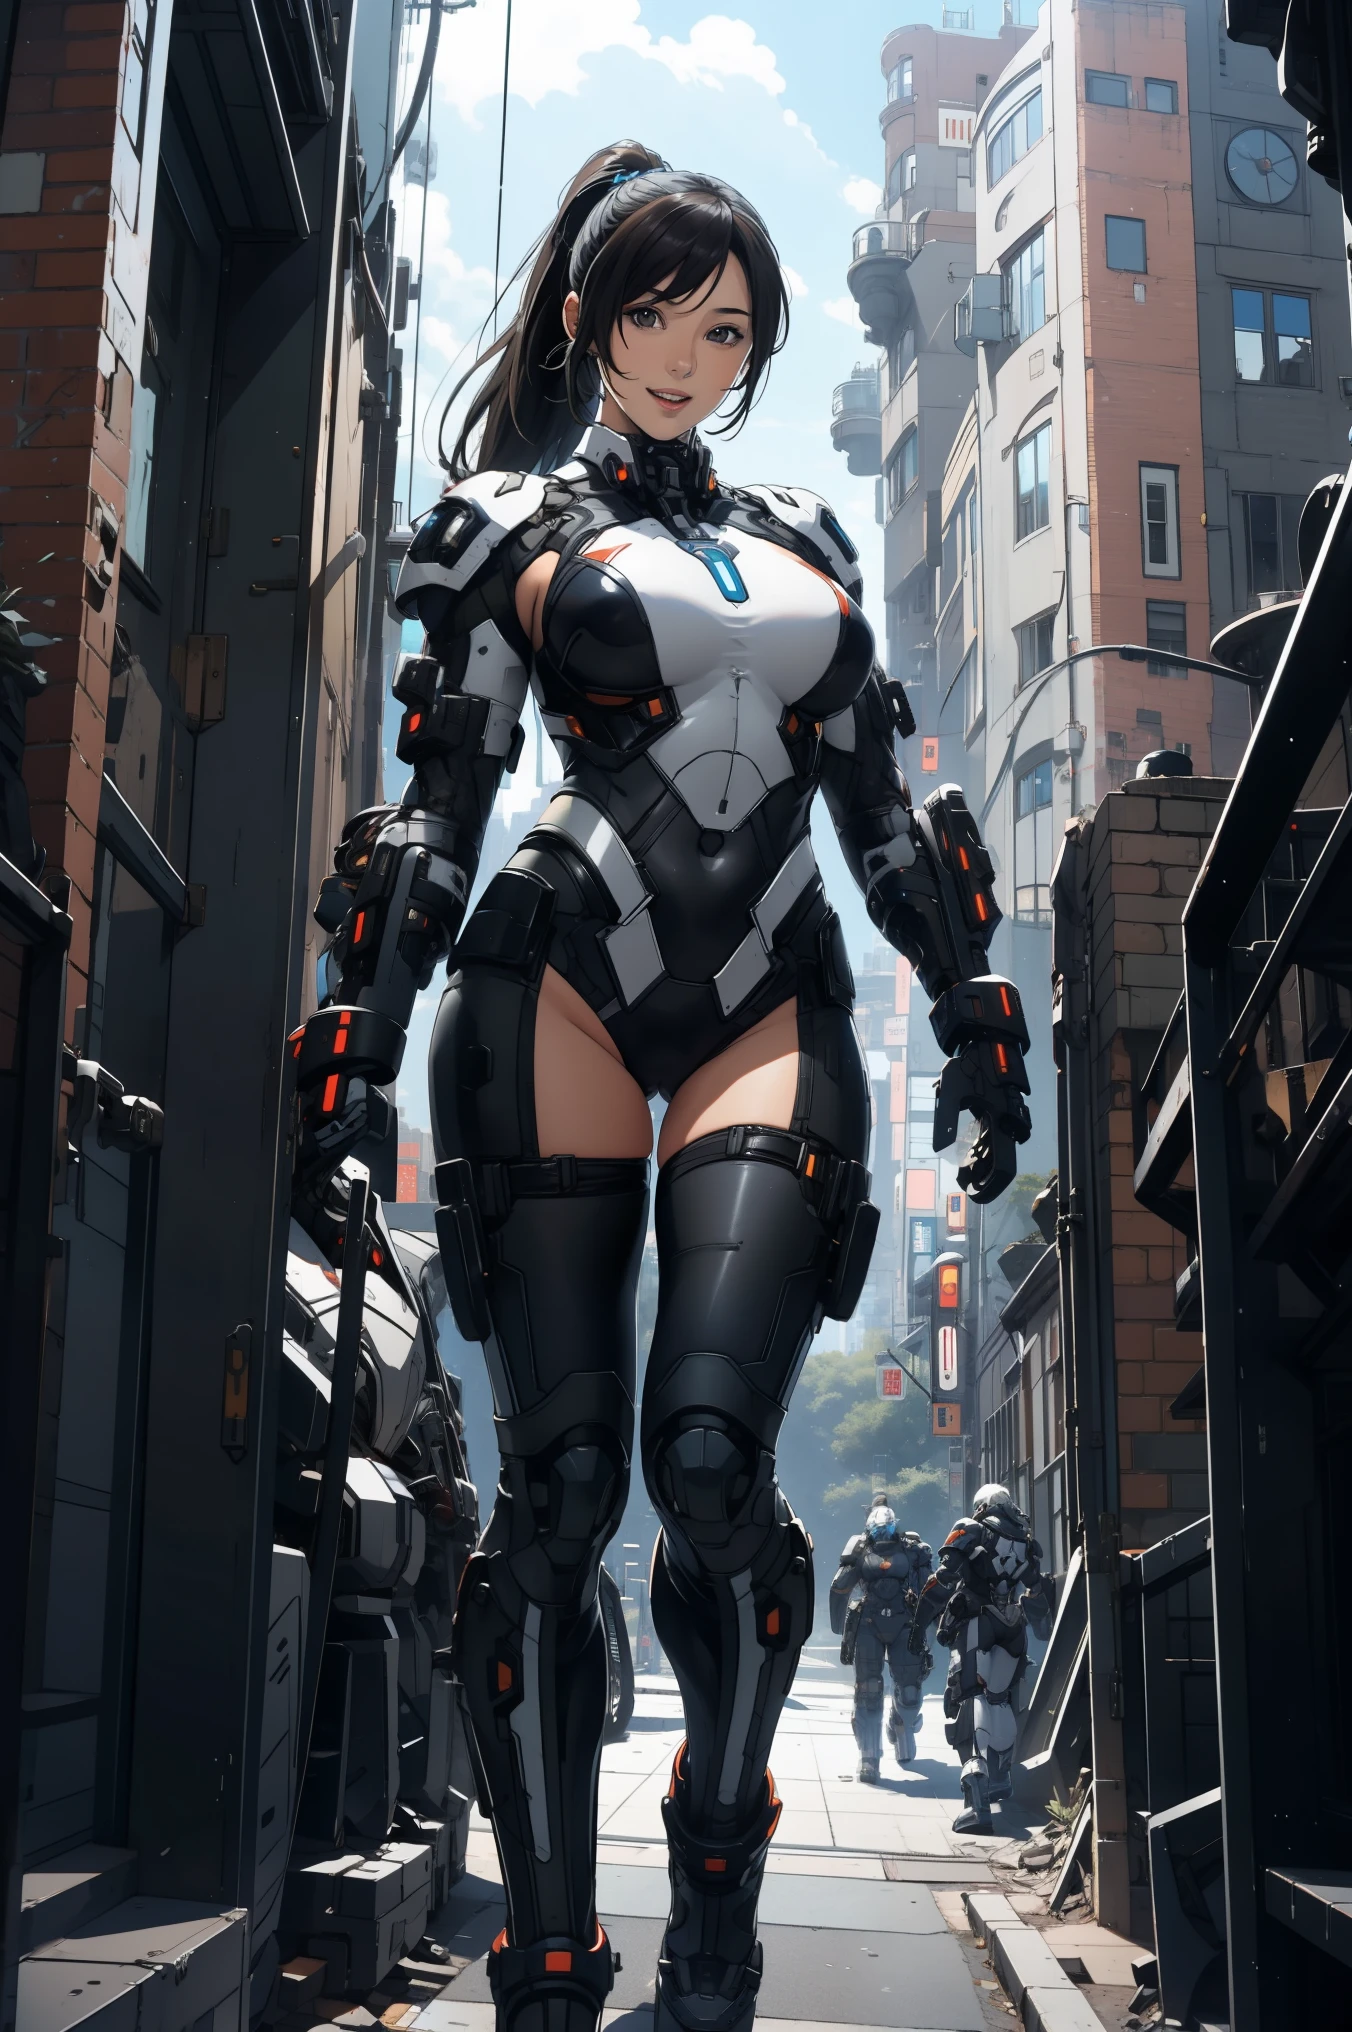 1 girl, black long hair ponytail, huge breast, mecha suit black color  full armor, smiling, arm at the hips, standing , at the centre of city, front view, looking to the viewer,  mouth open wide, fullbody shot, 